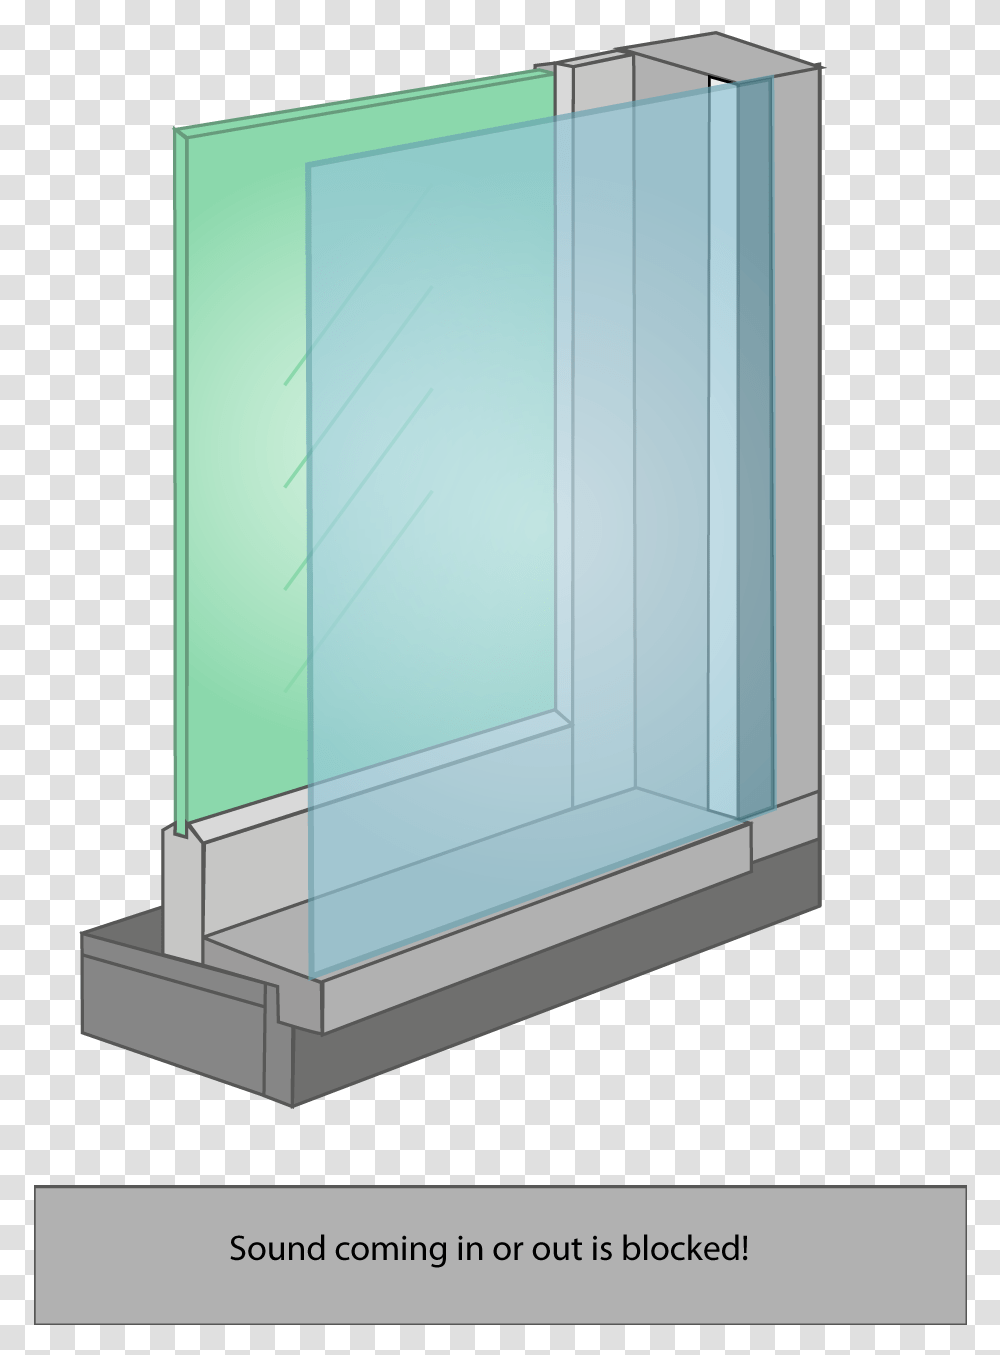 Secondary Magnaseal Window Acrylic Sheets For Soundproofing, Door, Elevator, Architecture, Building Transparent Png